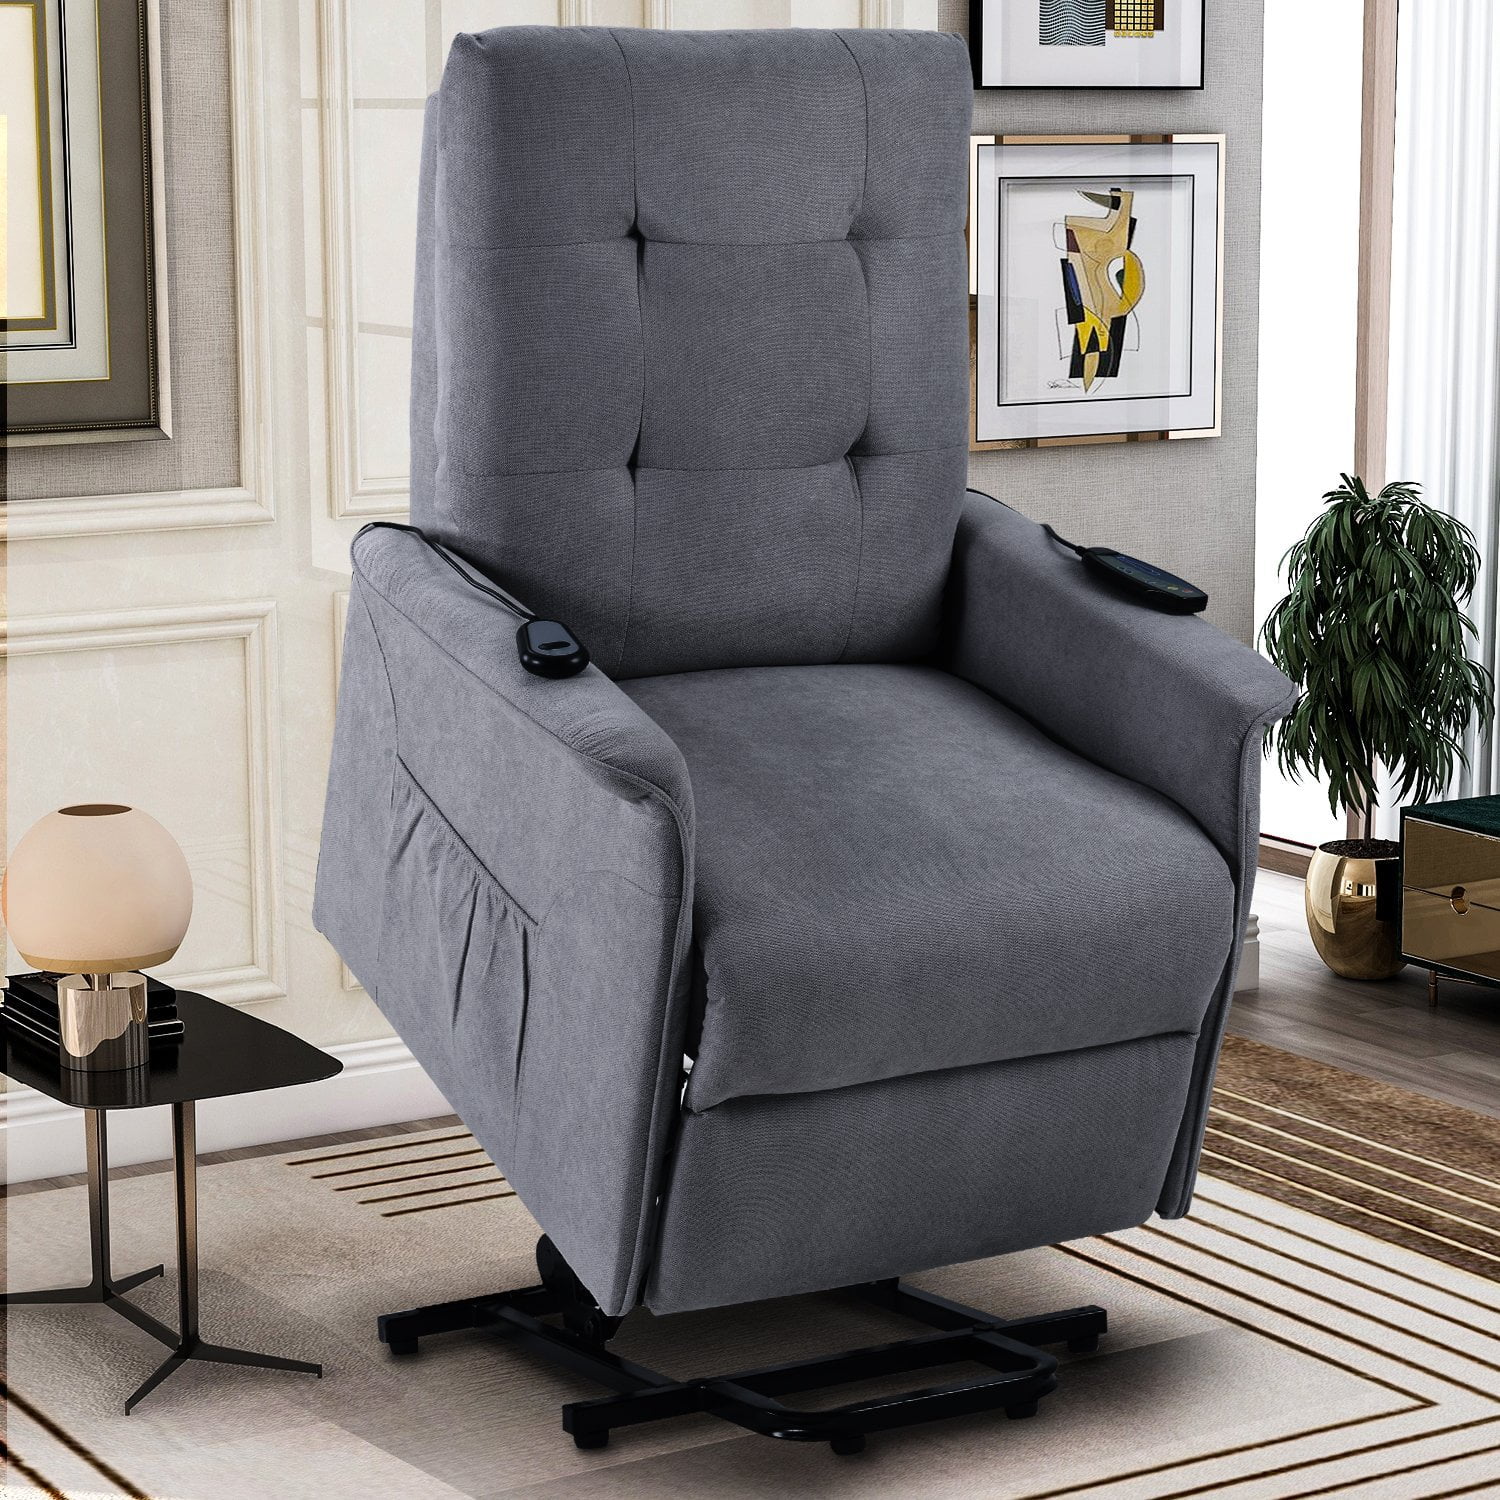 Recliner Chair For Elderly With Adjustable Headrest Massage - SG000181AAA